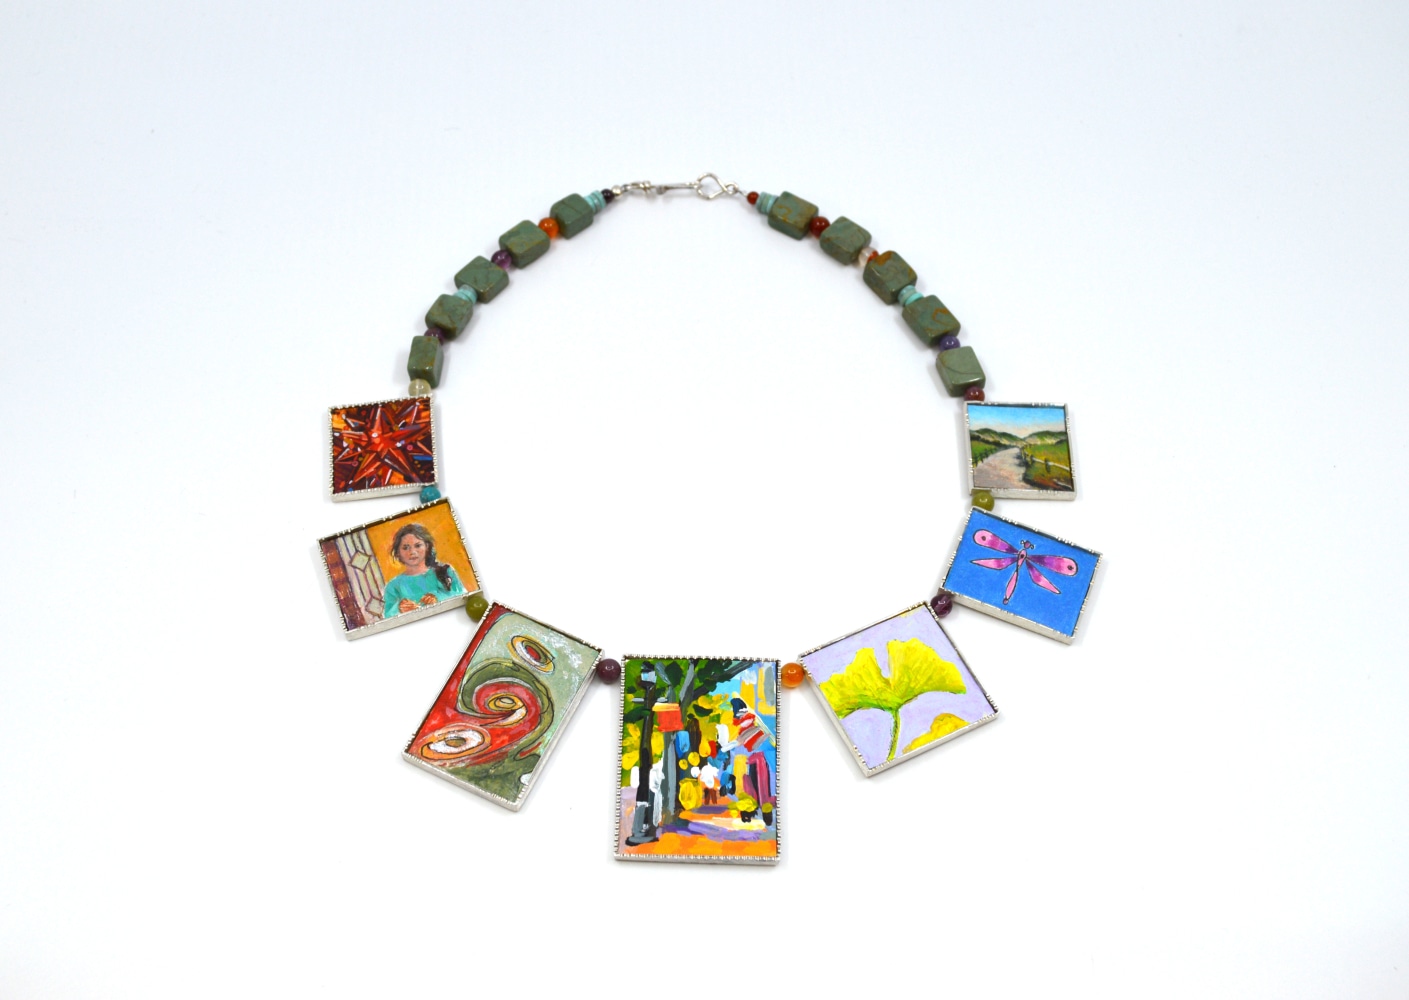 Margery Cooper, Opening Night, Necklace  19&quot;  Sterling Silver, Green Turquoise, Agate Beads, Painted Canvases  (Left to Right) - Brian Defress, Irene Nunn, Neil Dreibelbis, Elaine Lisle, Frank DePietro, Alice Norman Mandel, Eliza Auth